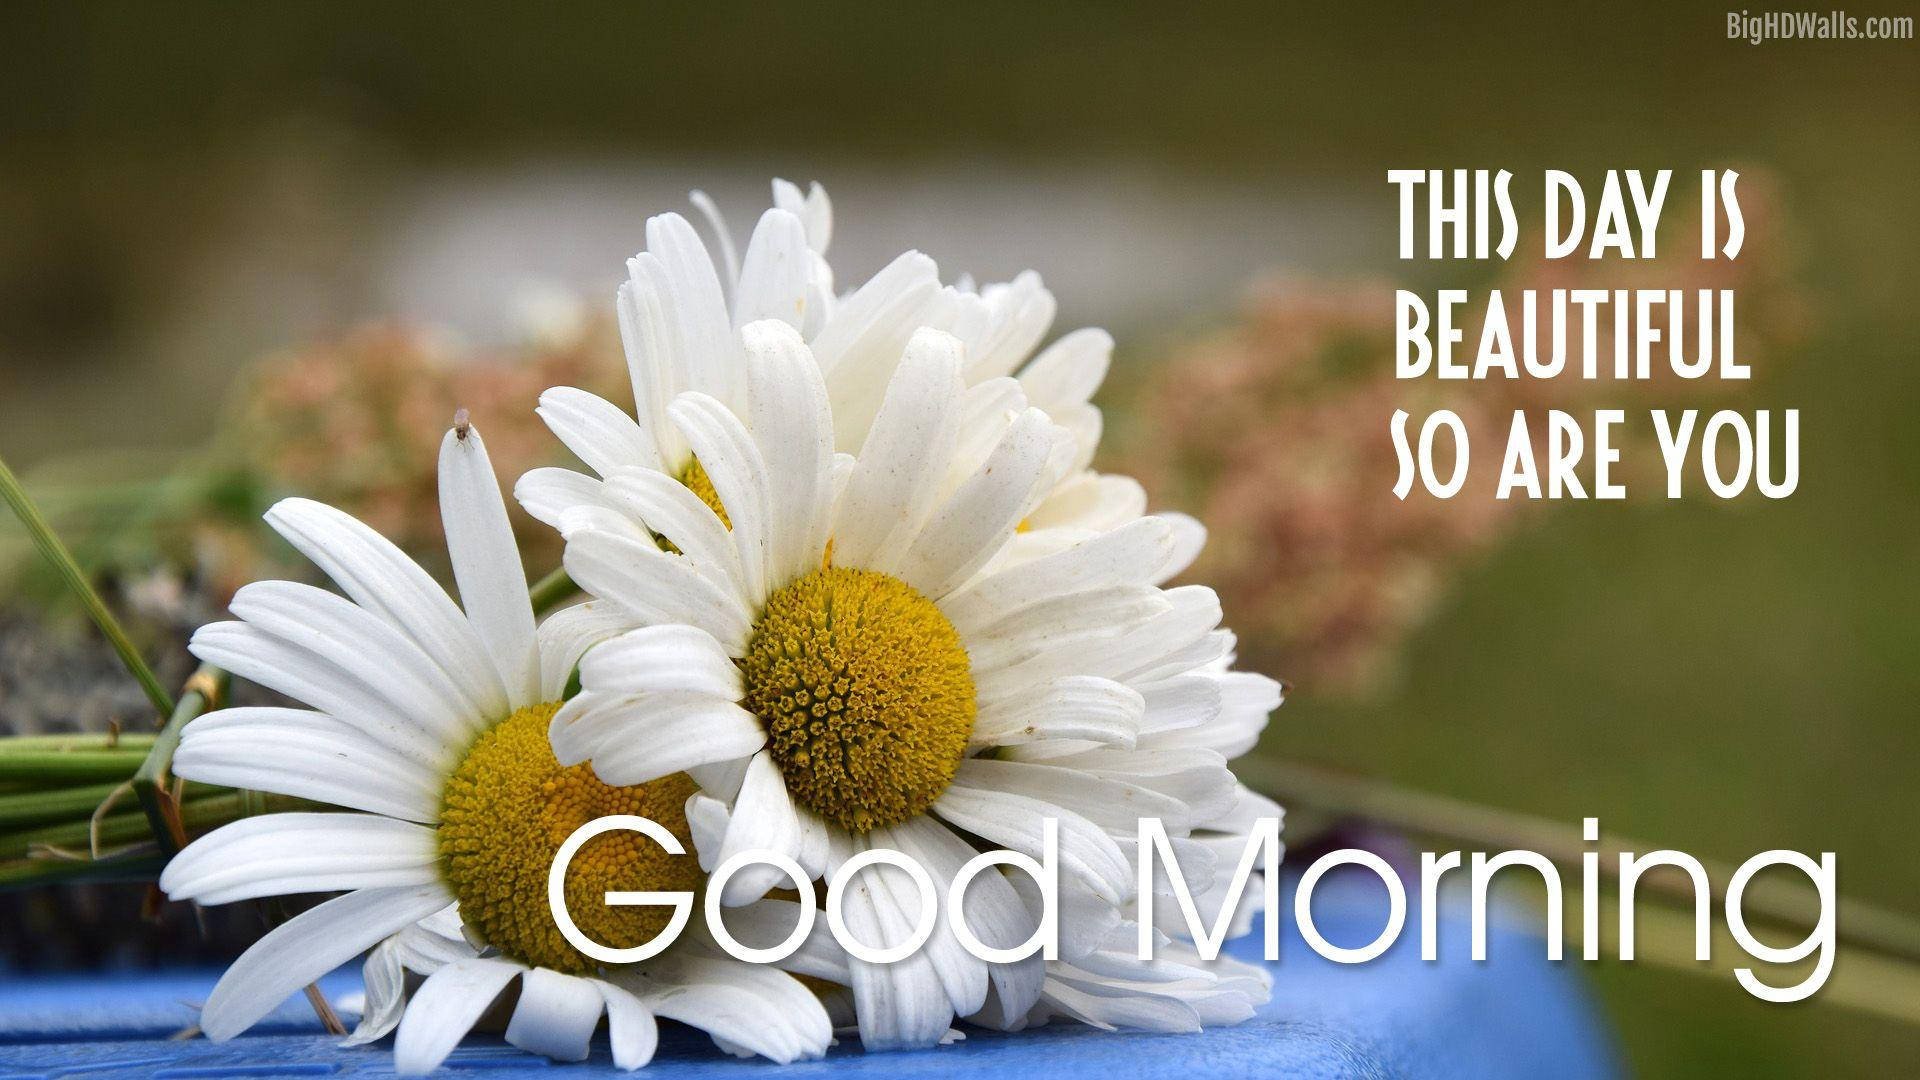 Good Morning Hd With Daisy Background